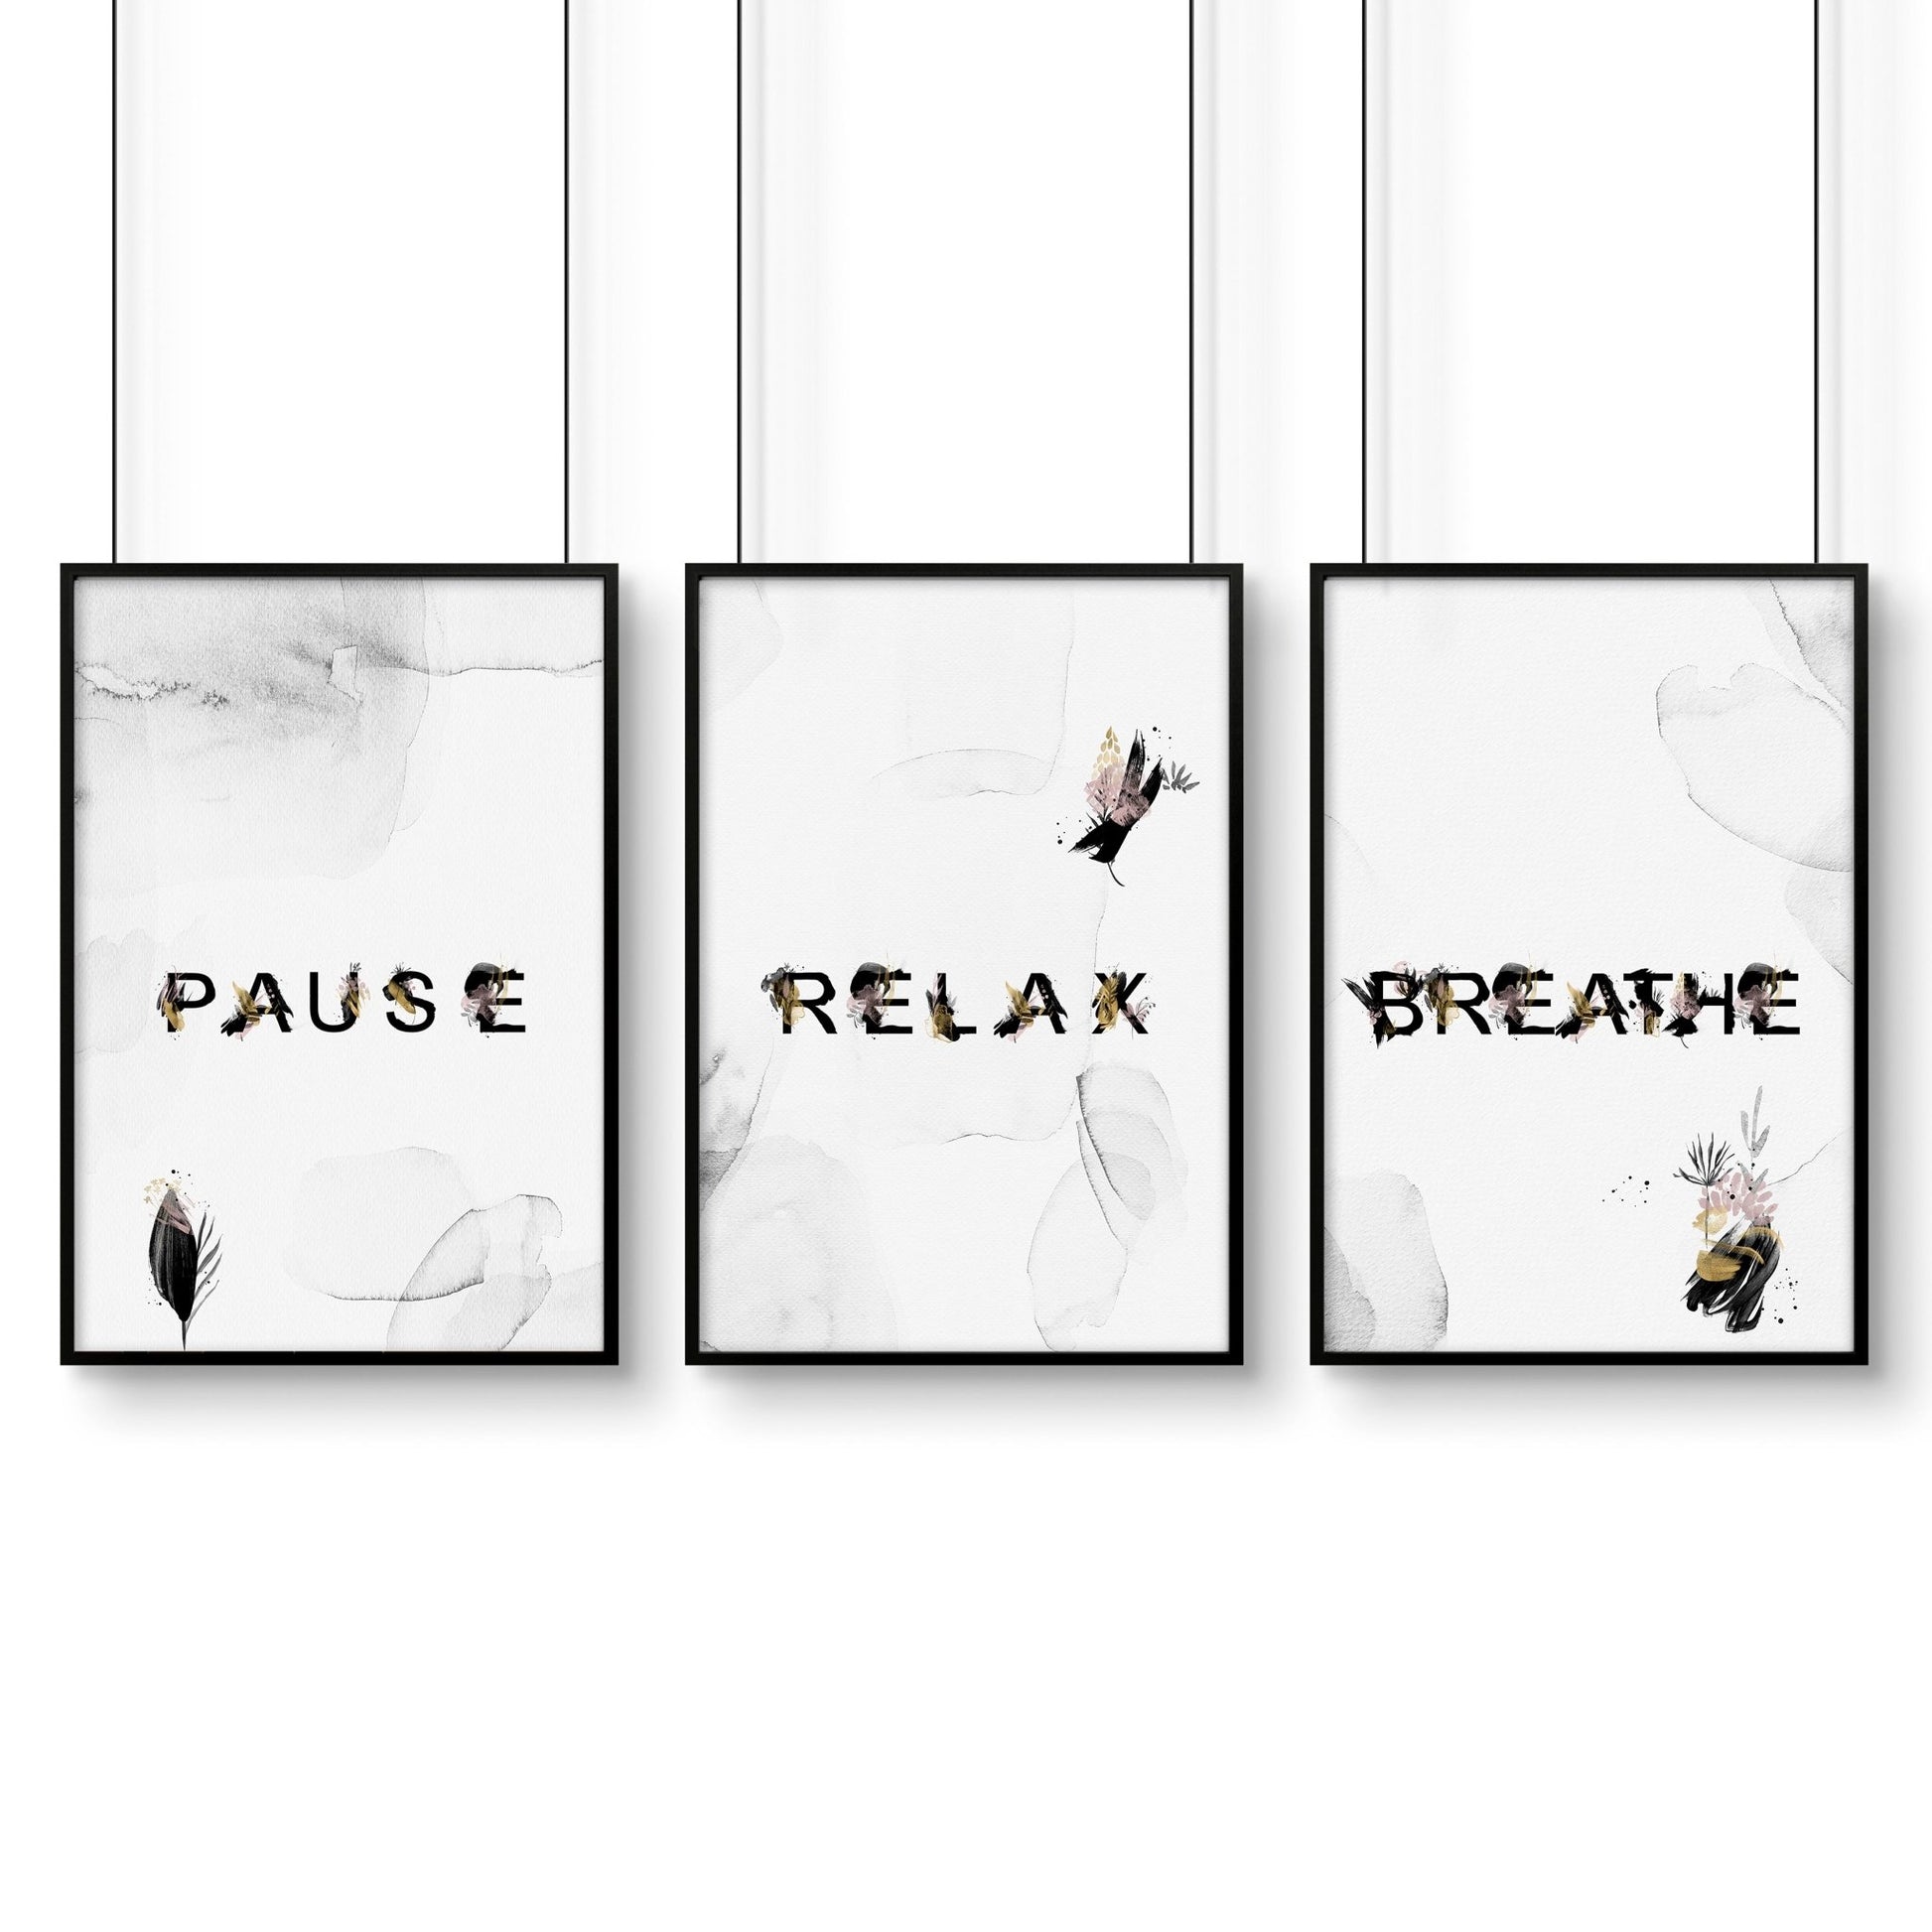 Relaxing wall art | set of 3 wall art prints for Bathroom - About Wall Art